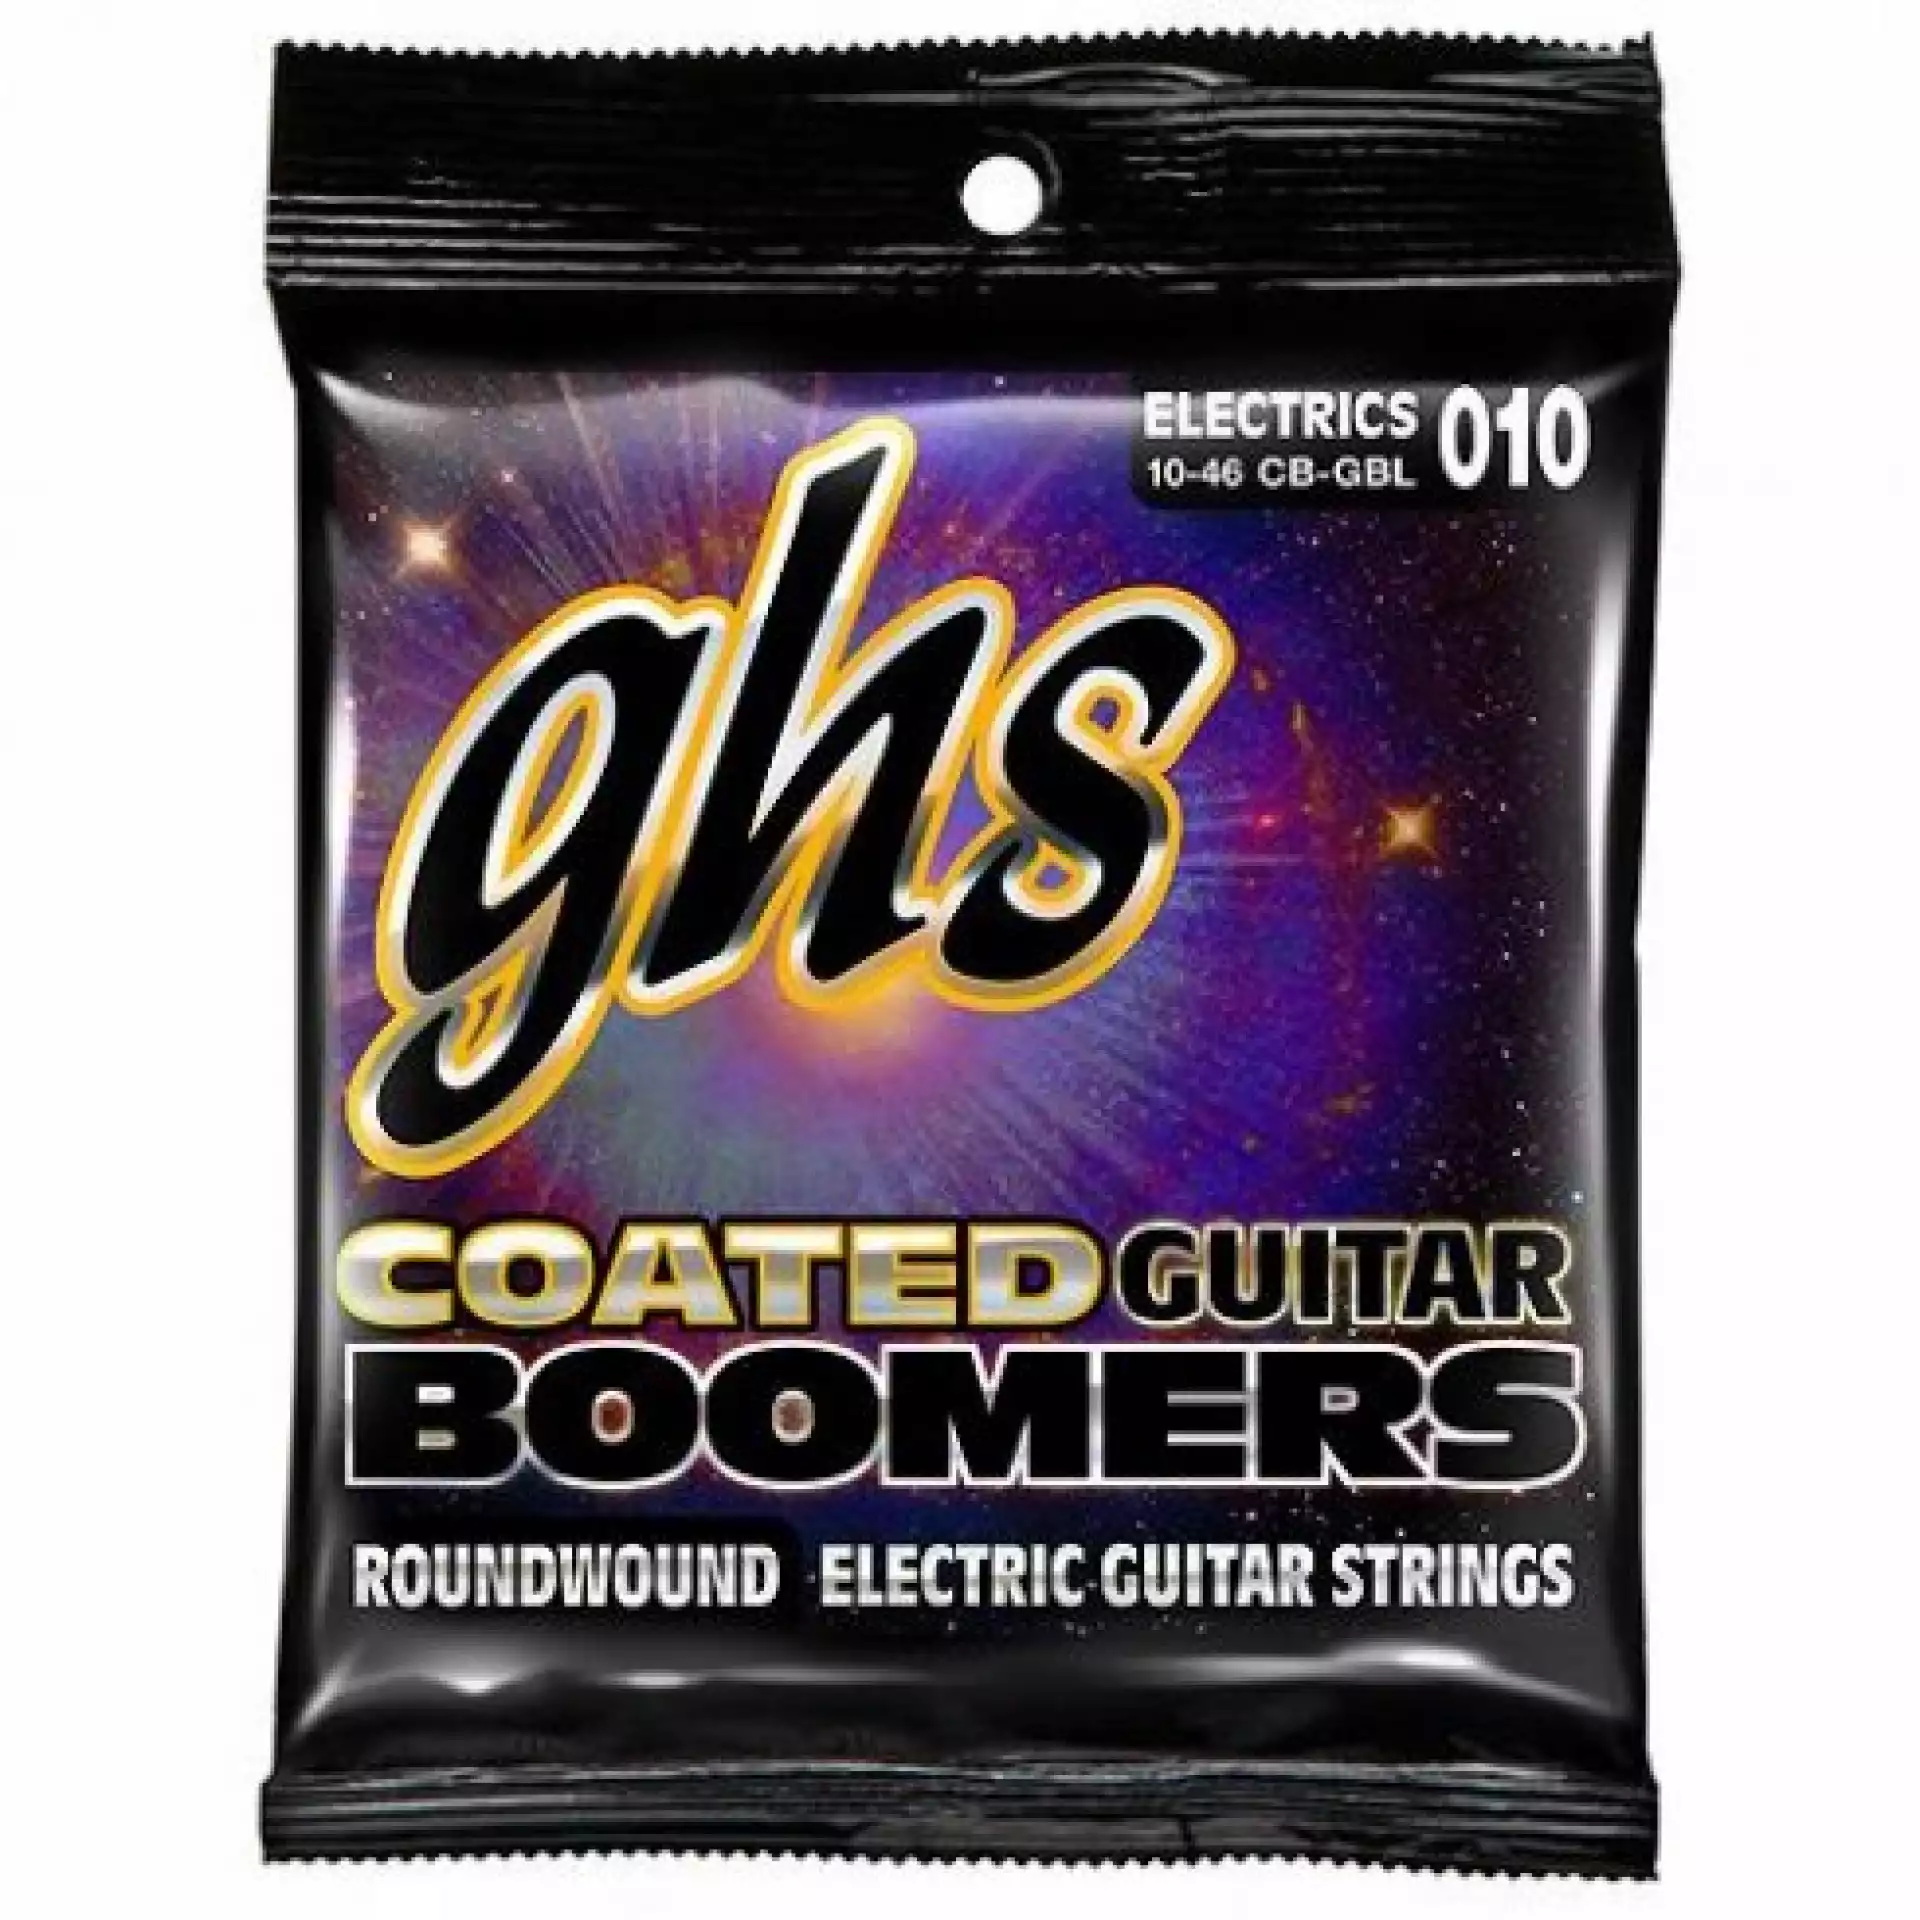 GHS CB-GBL Boomers Nickel Plated Steel Electric Guitar Strings 10-46 Light